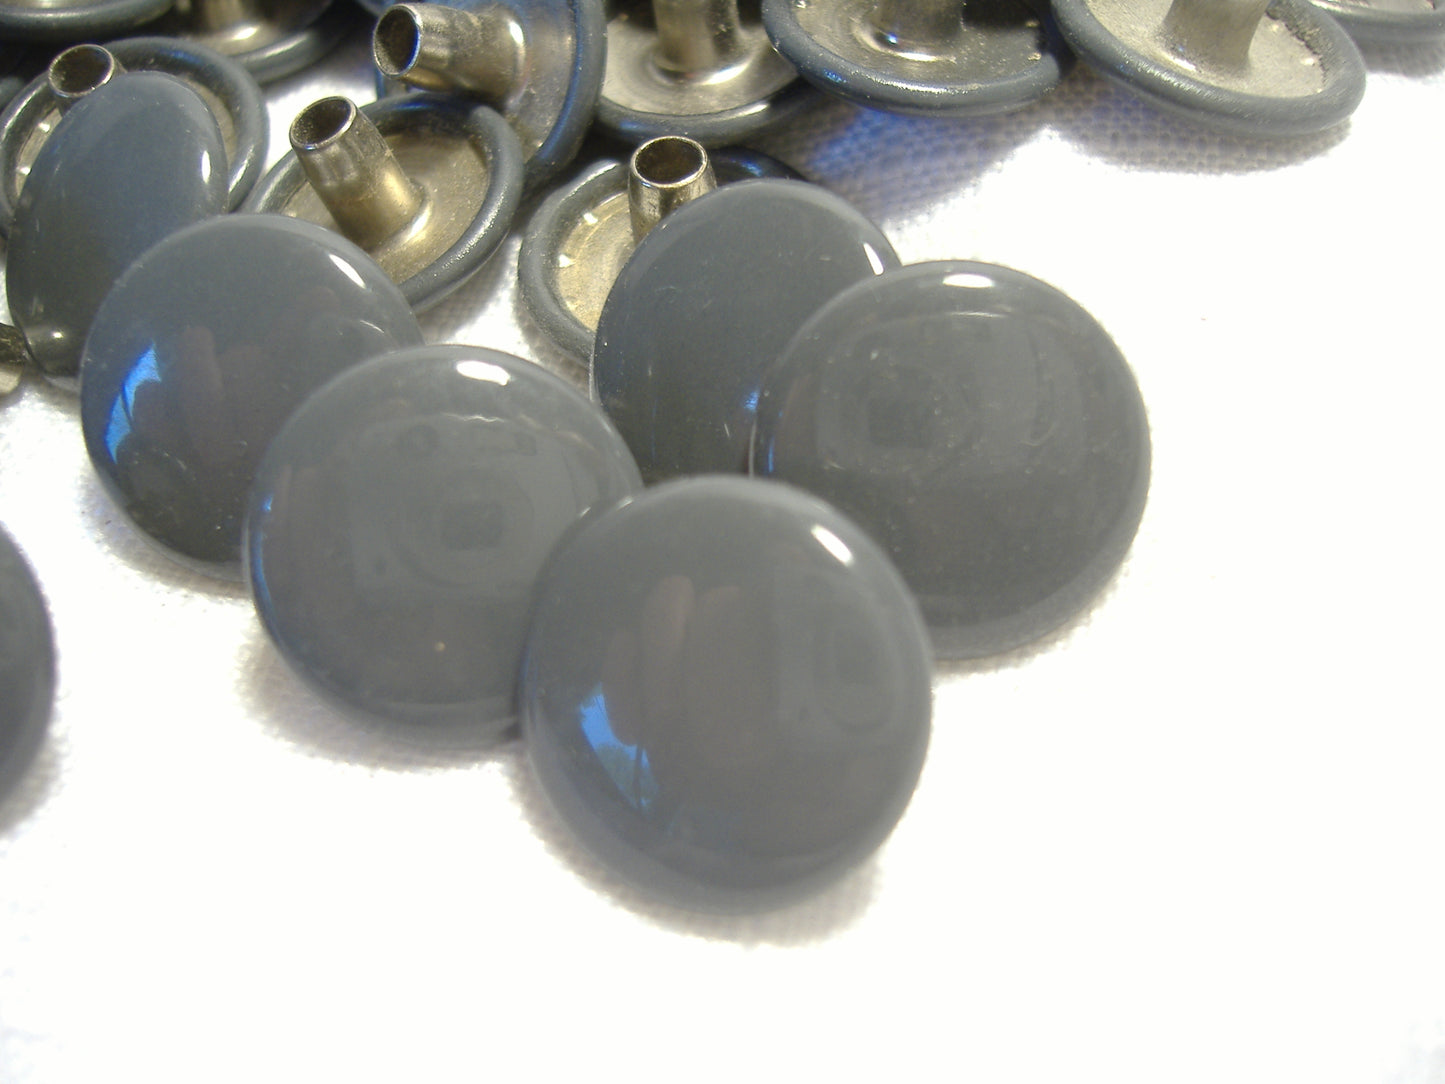 Gray Stainless Steel Snap Fastener Buttons Tonneau Cover Qty 100 Pieces OEM NOS California Sidecar